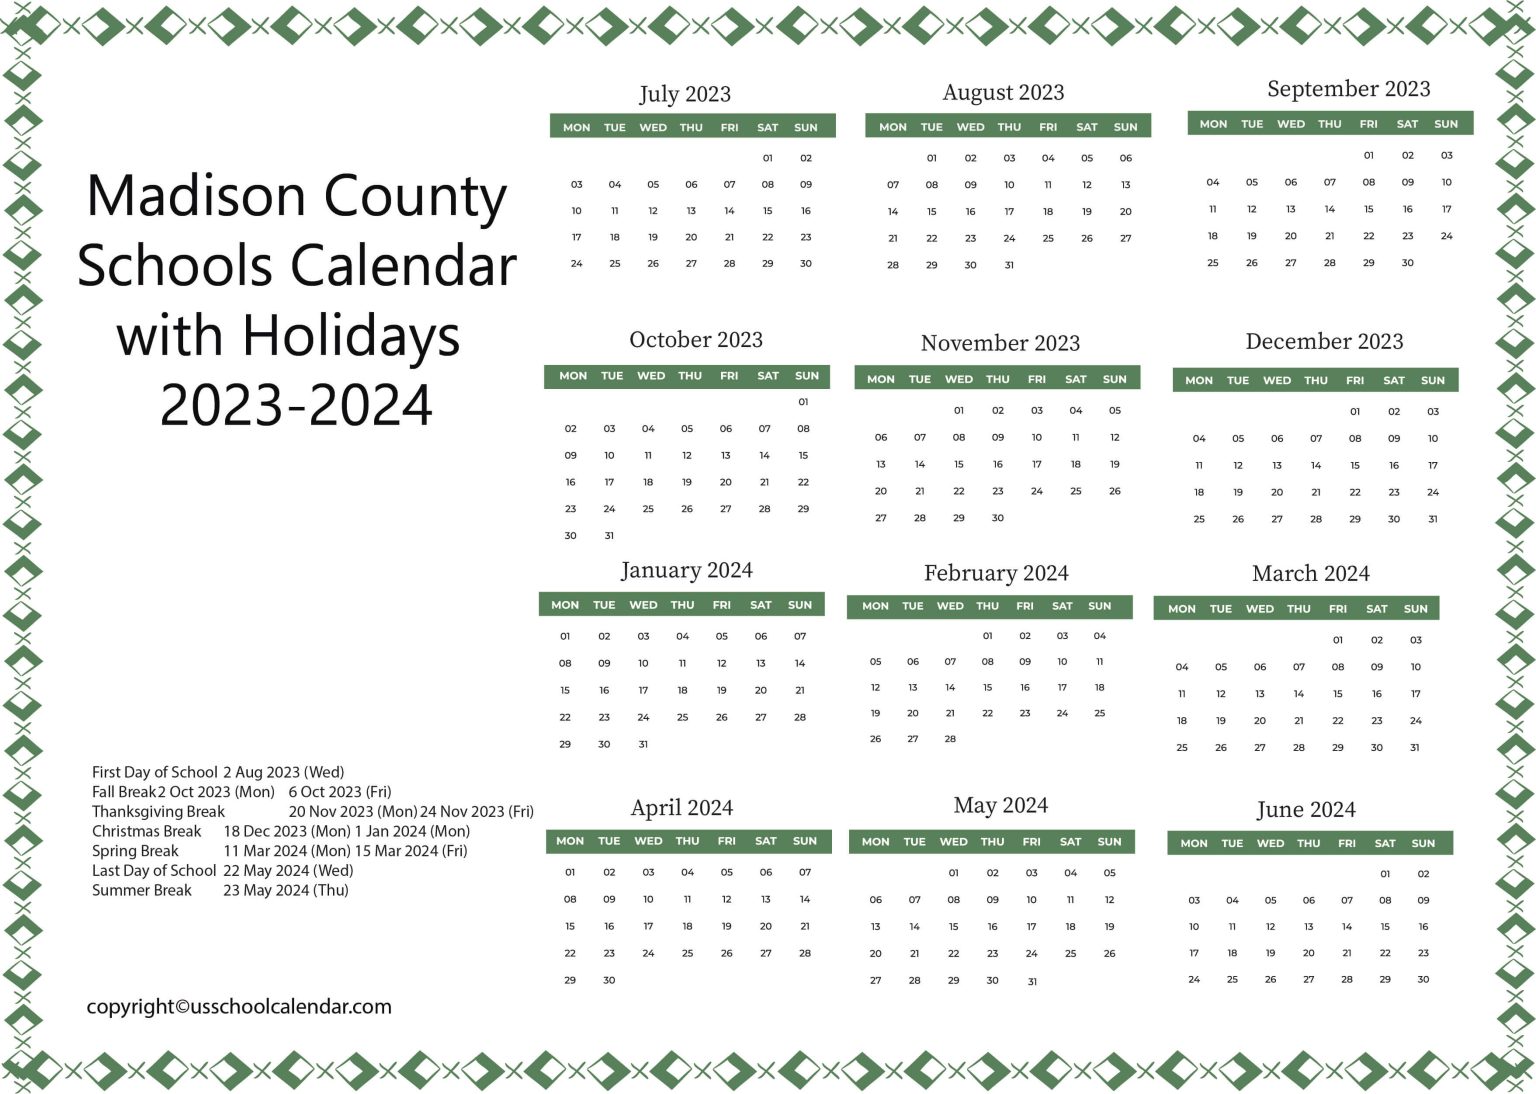 madison-county-schools-calendar-with-holidays-2023-2024